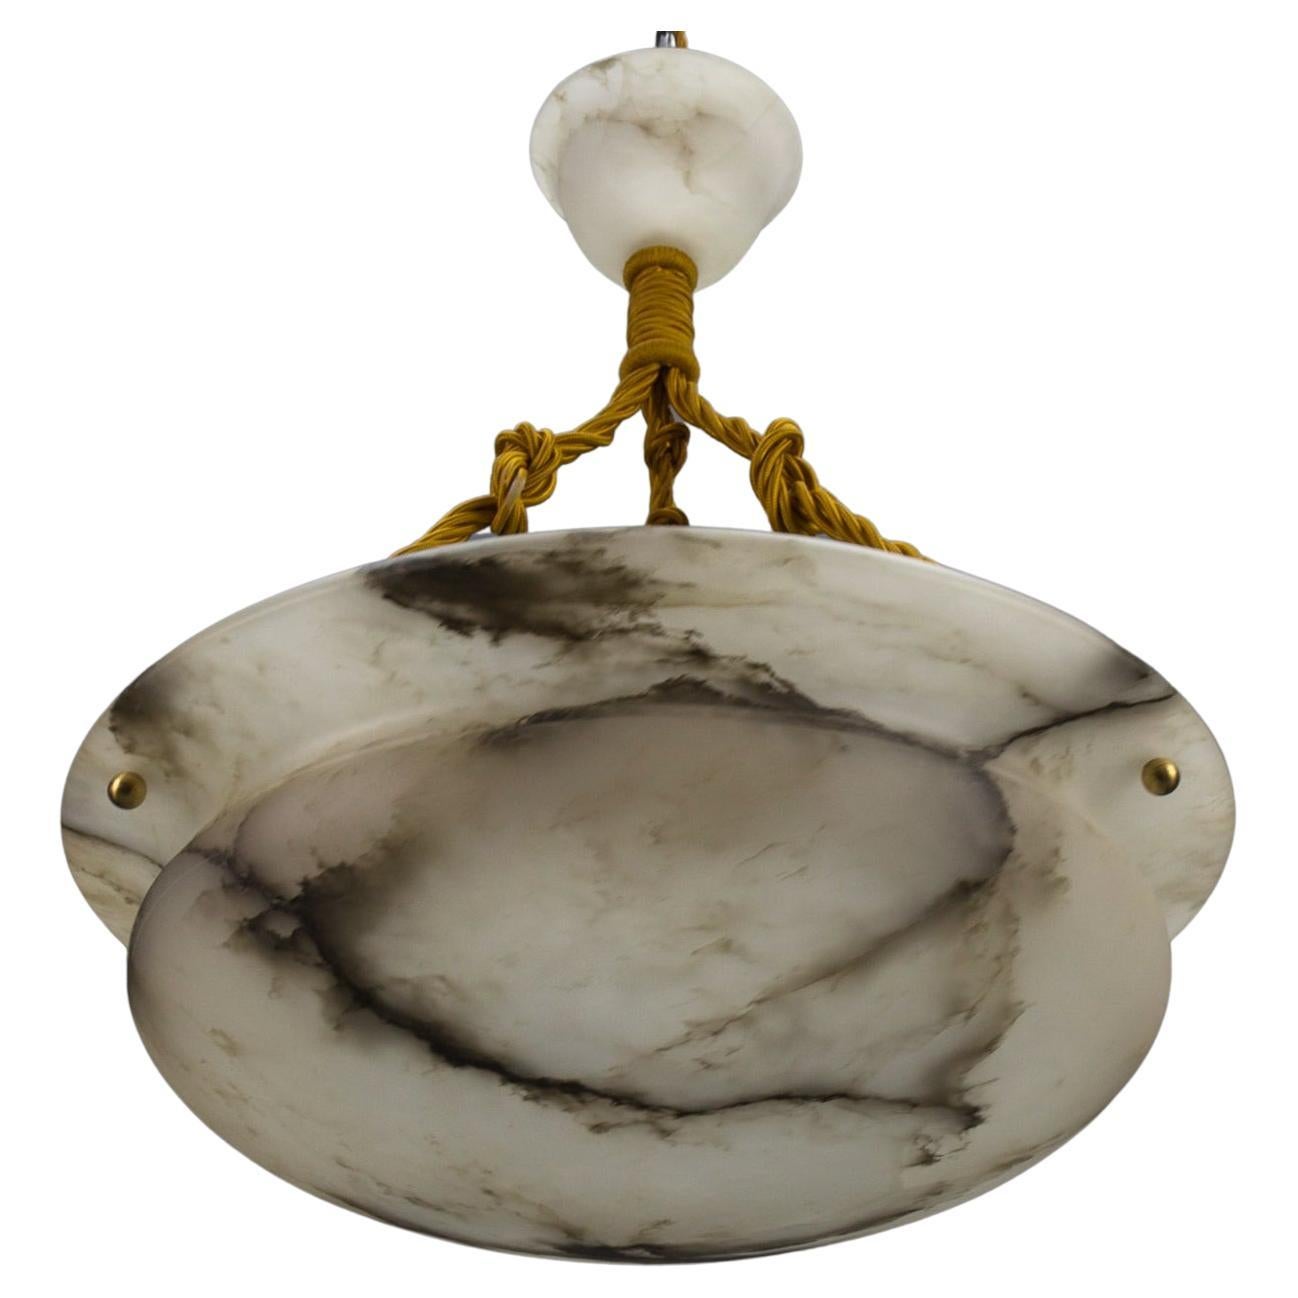 French Art Deco White and Black Veined Alabaster Pendant Light, ca 1920